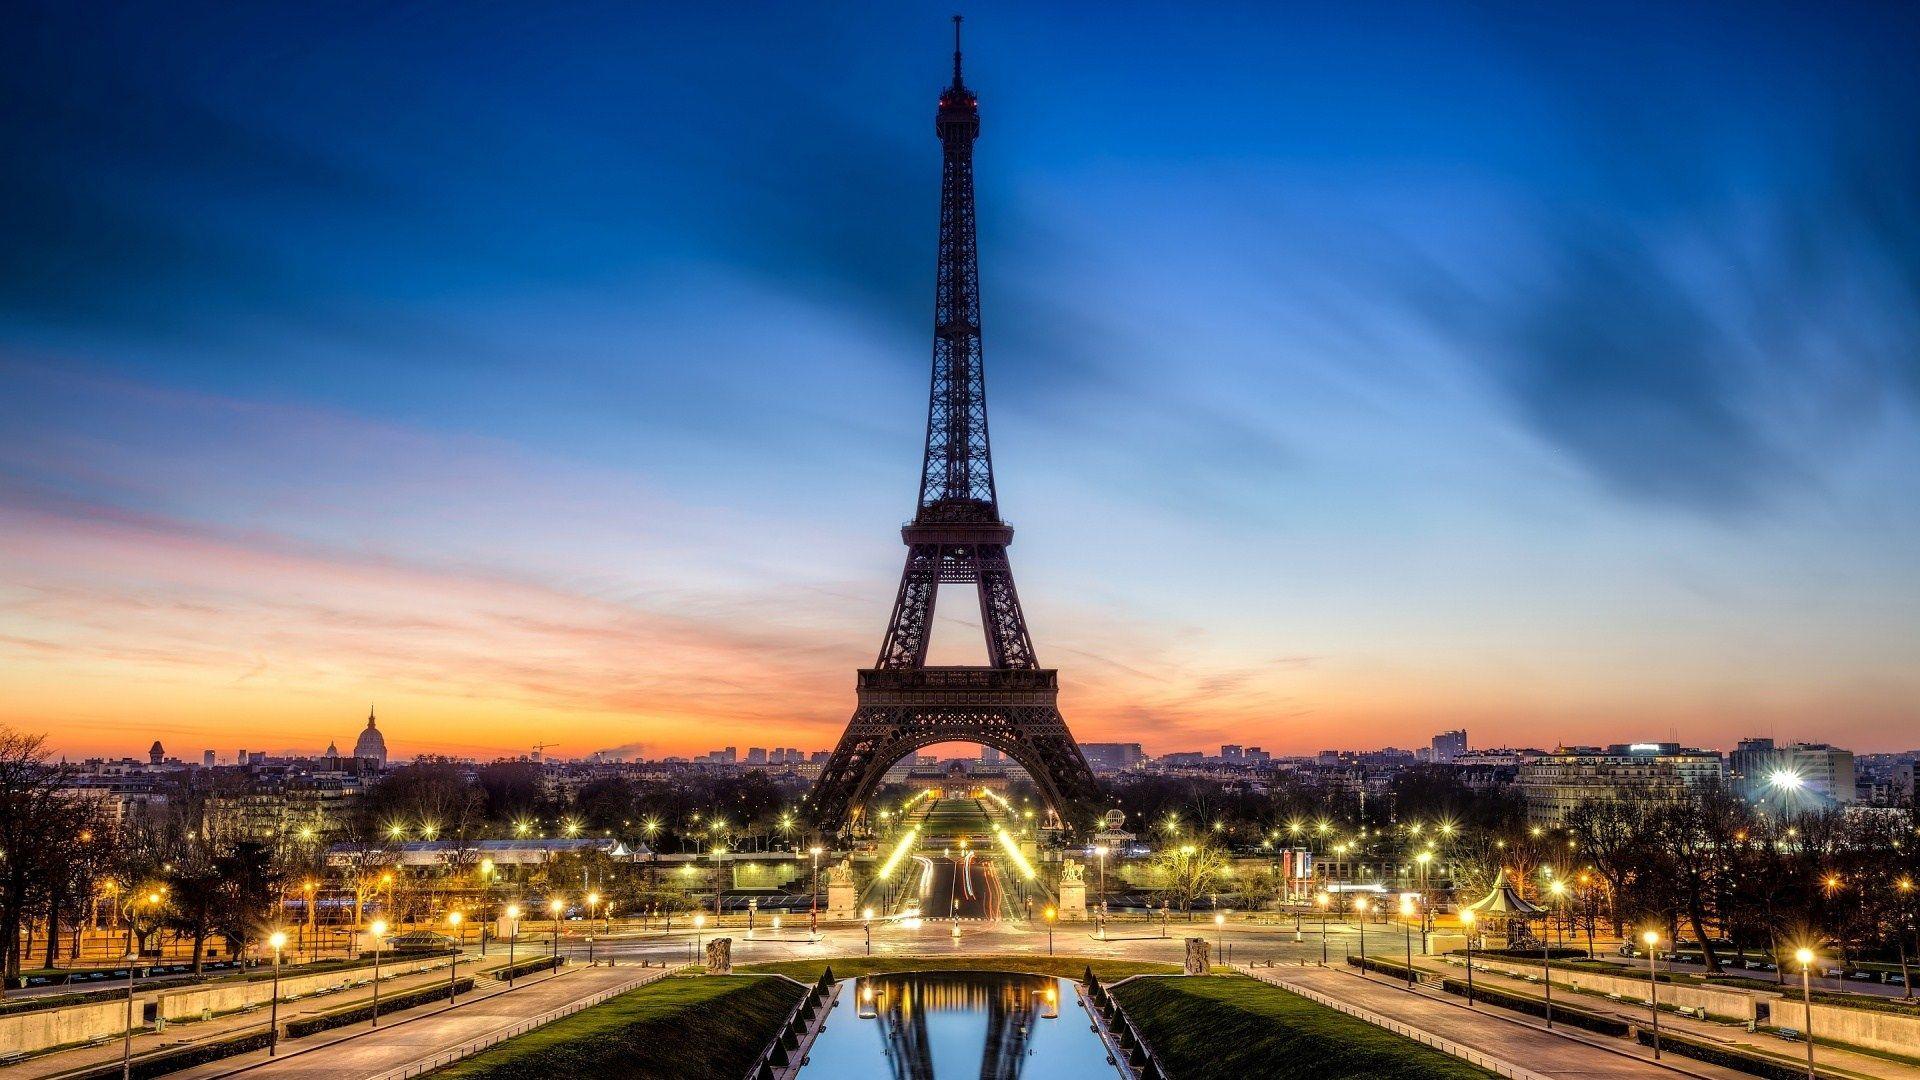 Eiffel Tower Photos Download Free Eiffel Tower Stock Photos  HD Images